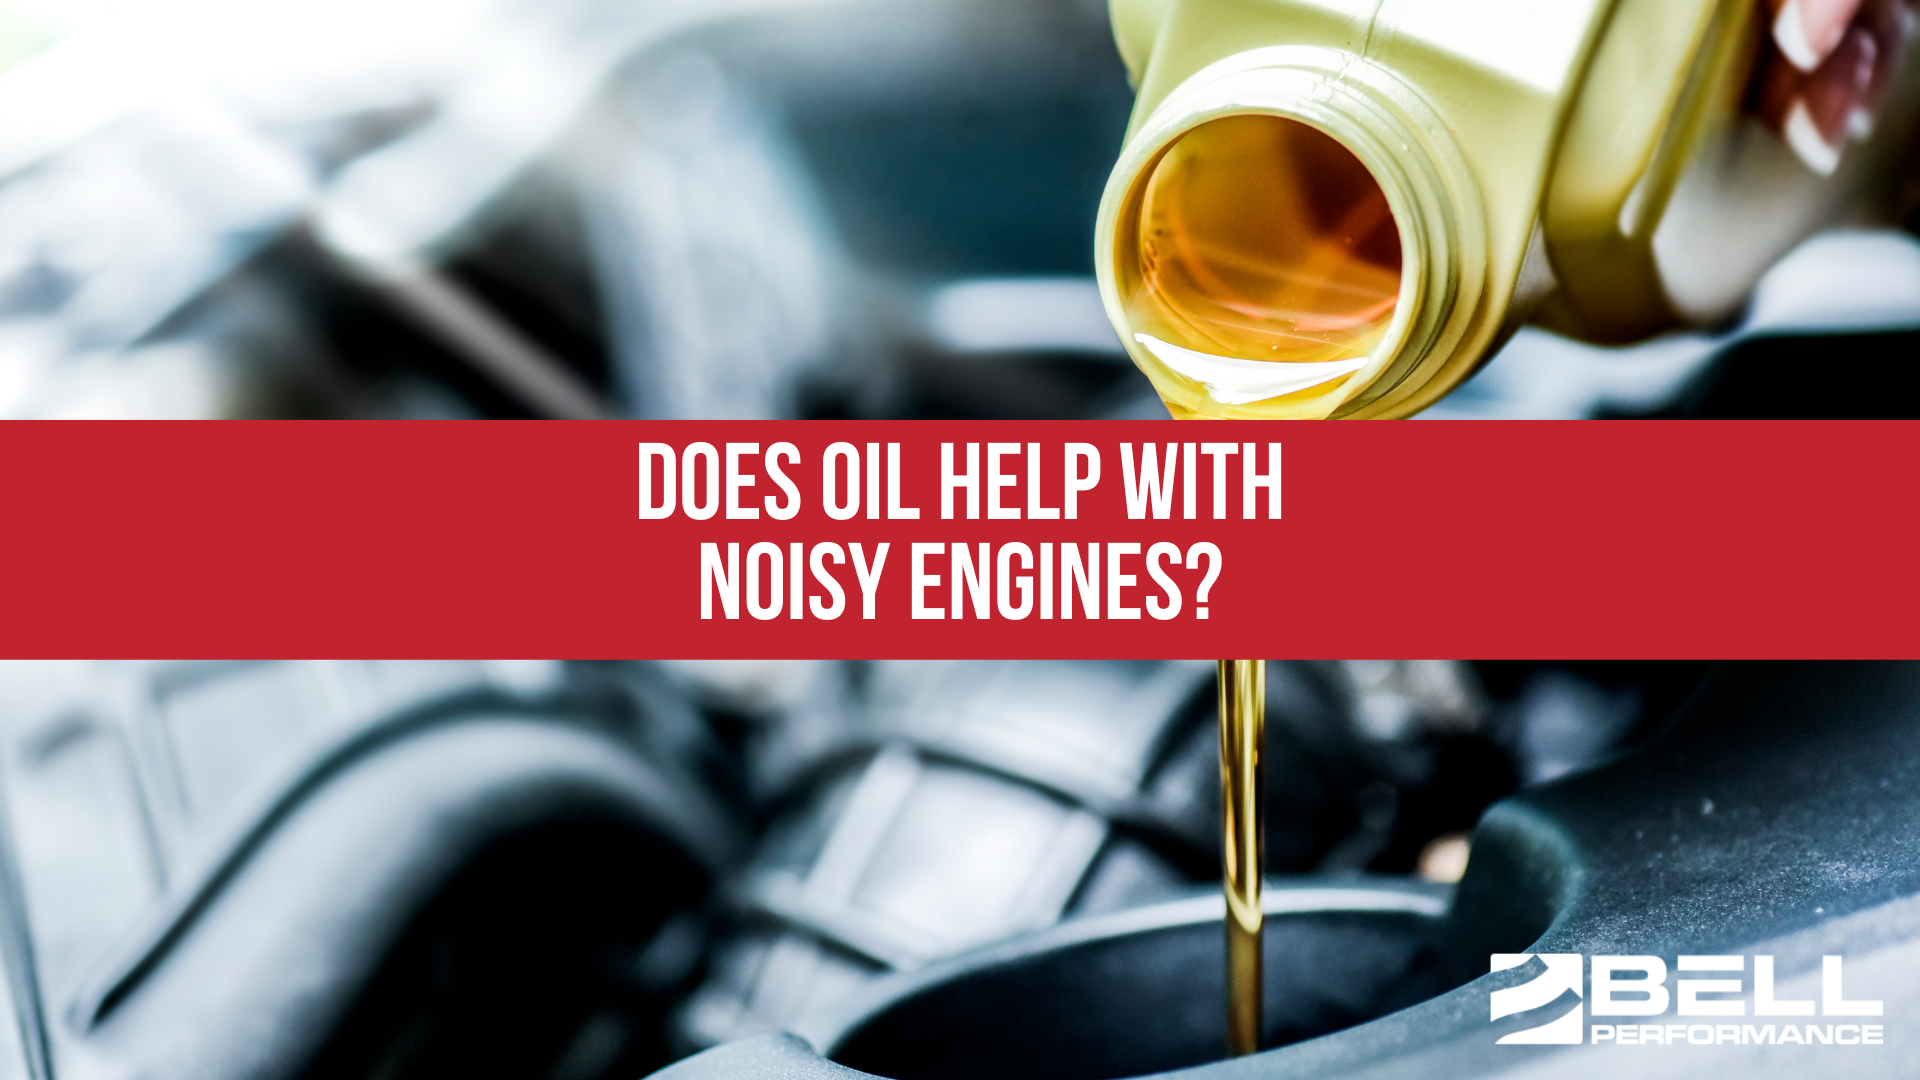 Does oil help with noisy engines?